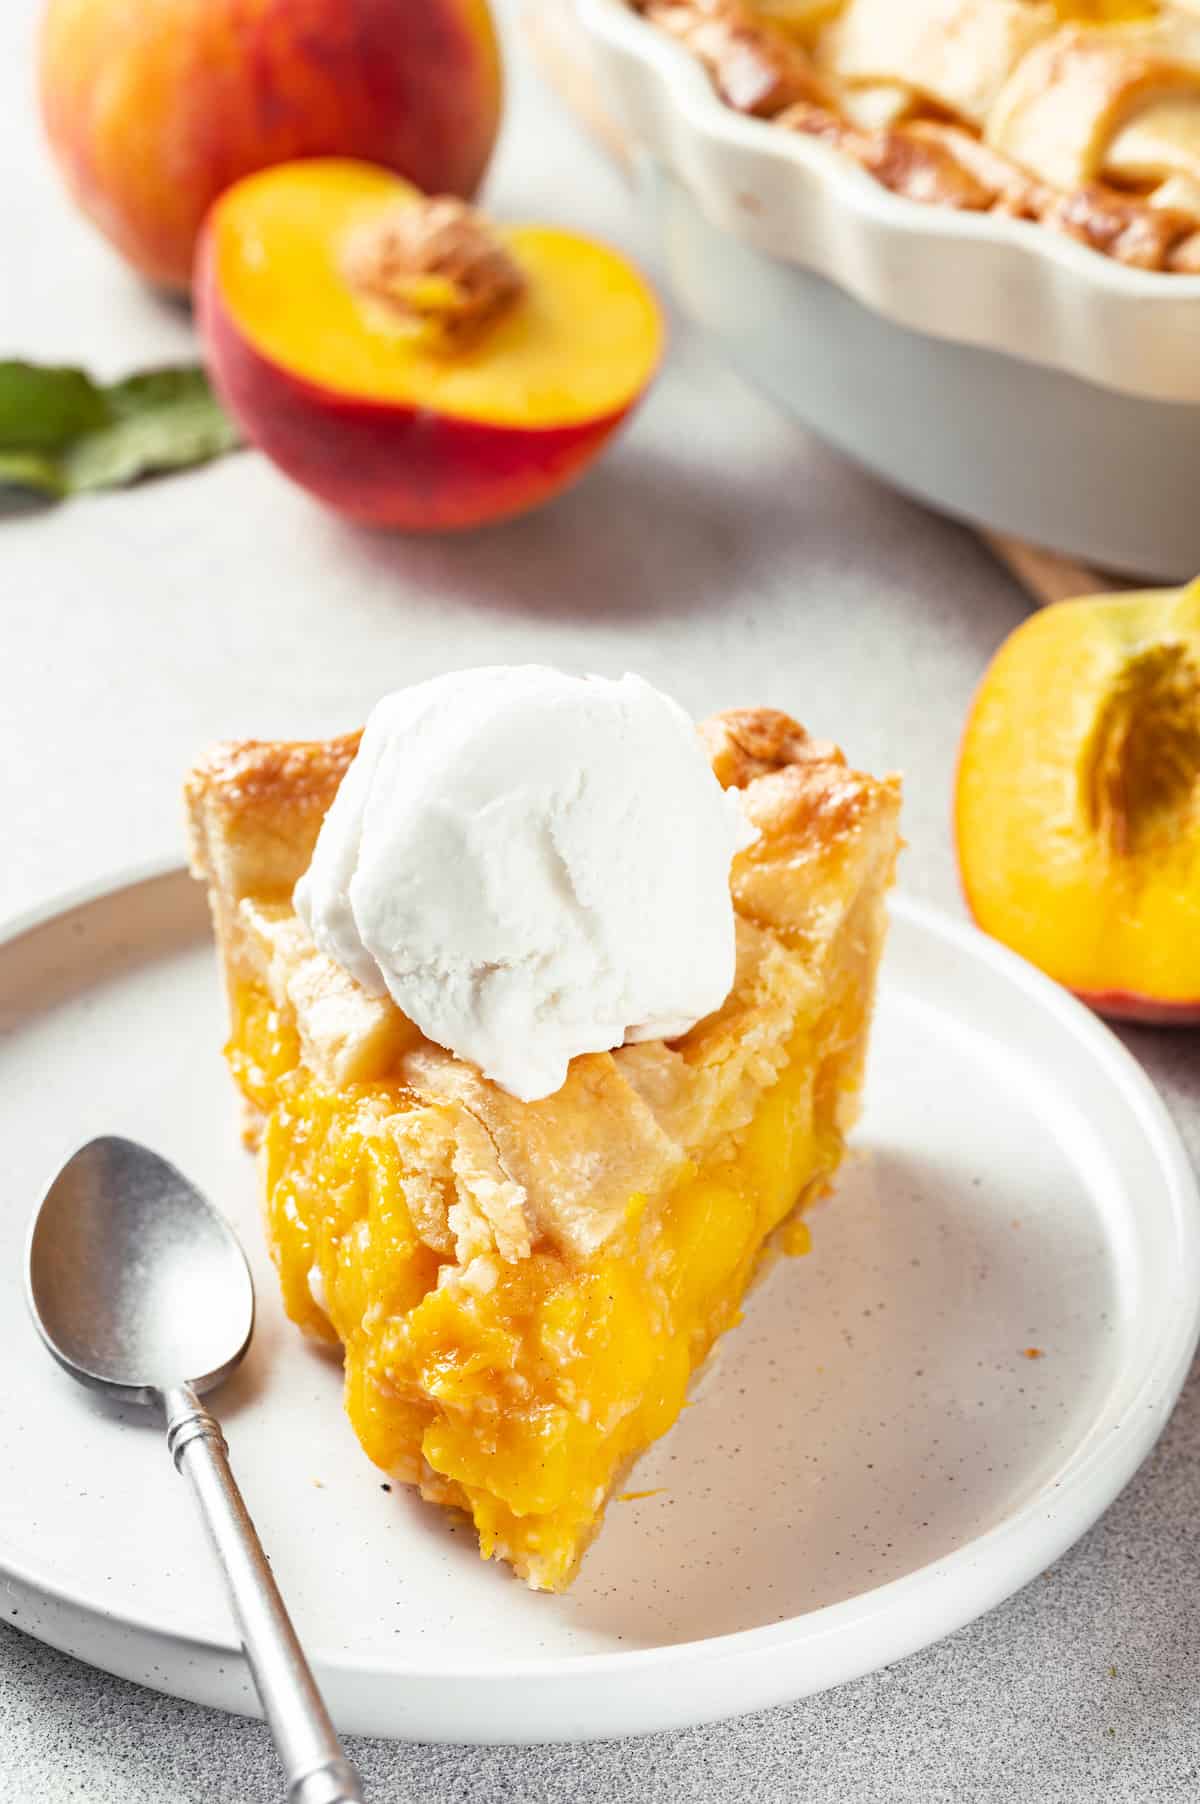 A slice of peach pie topped with a scoop of ice cream